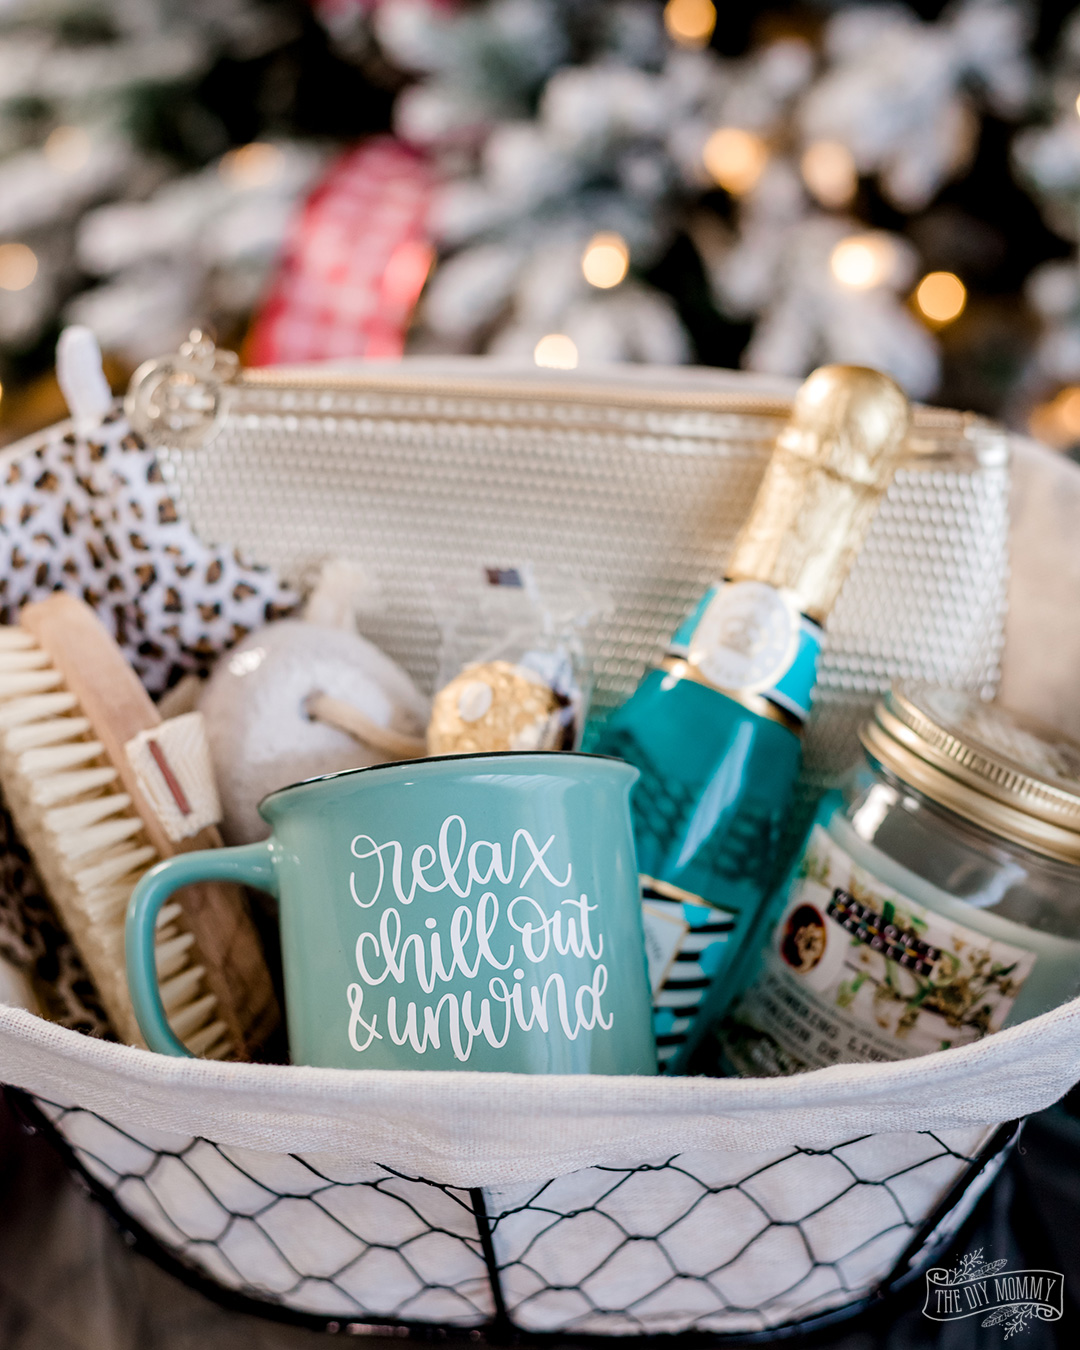 DIY Gift Basket Ideas using dollar store items + personalized details!